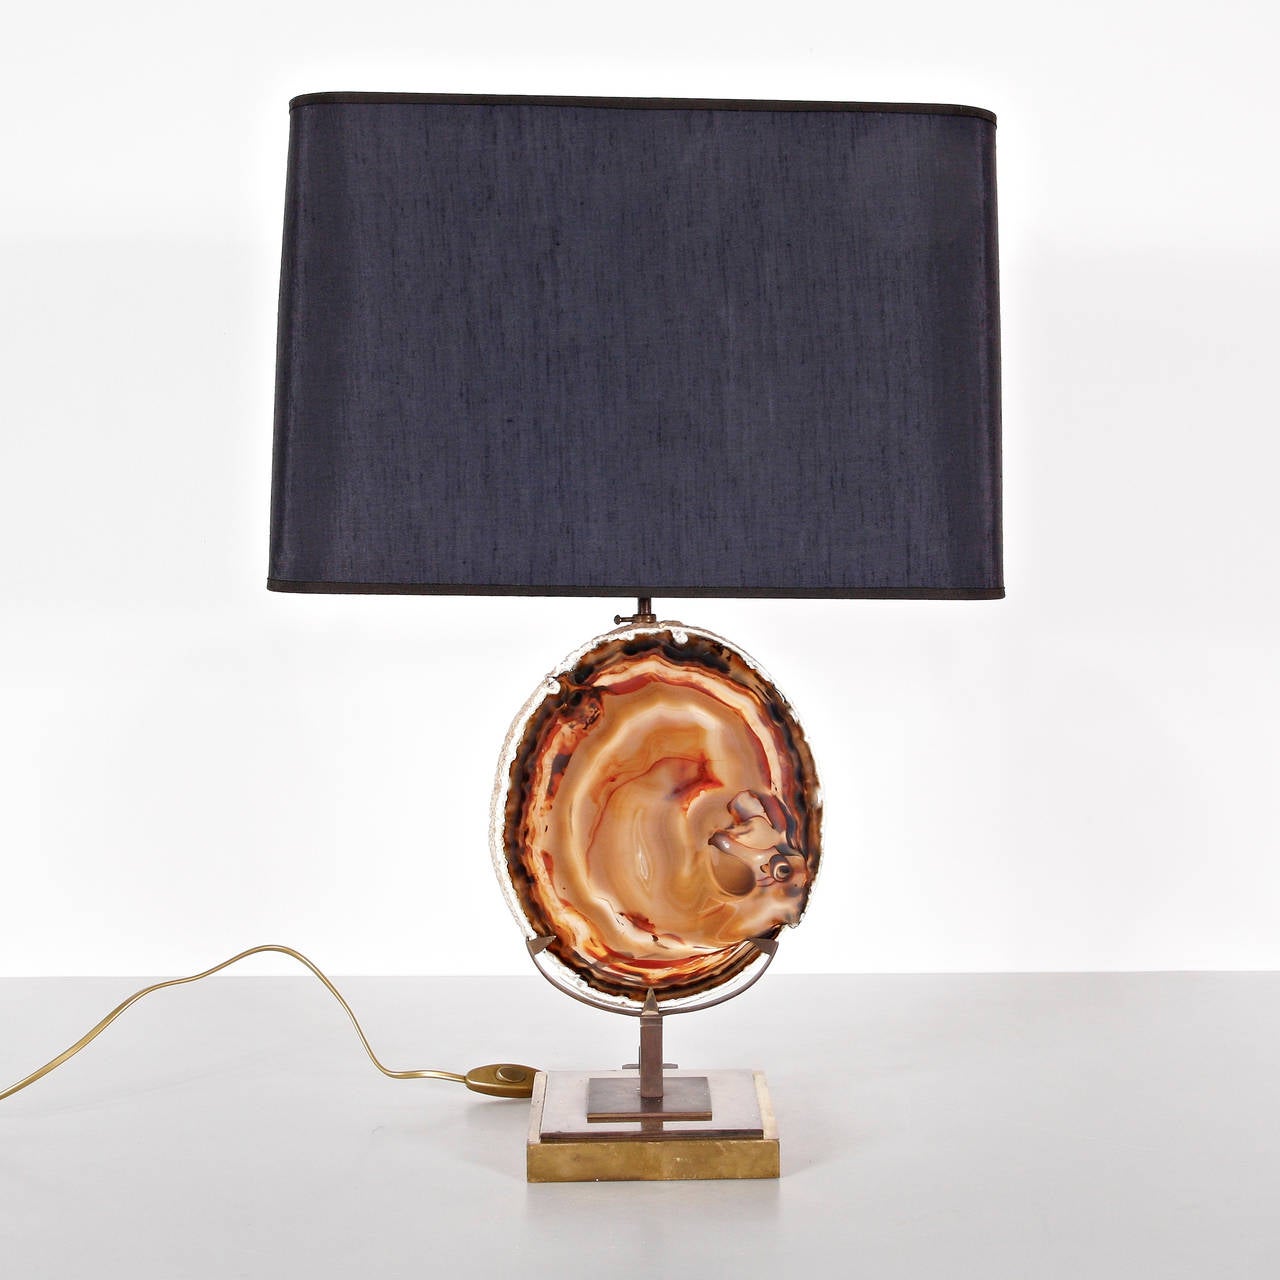 Spectacular agate table lamp in the manner of Willy Daro, manufactured, circa 1970 in Belgium.

In good original condition, preserving a beautiful patina.